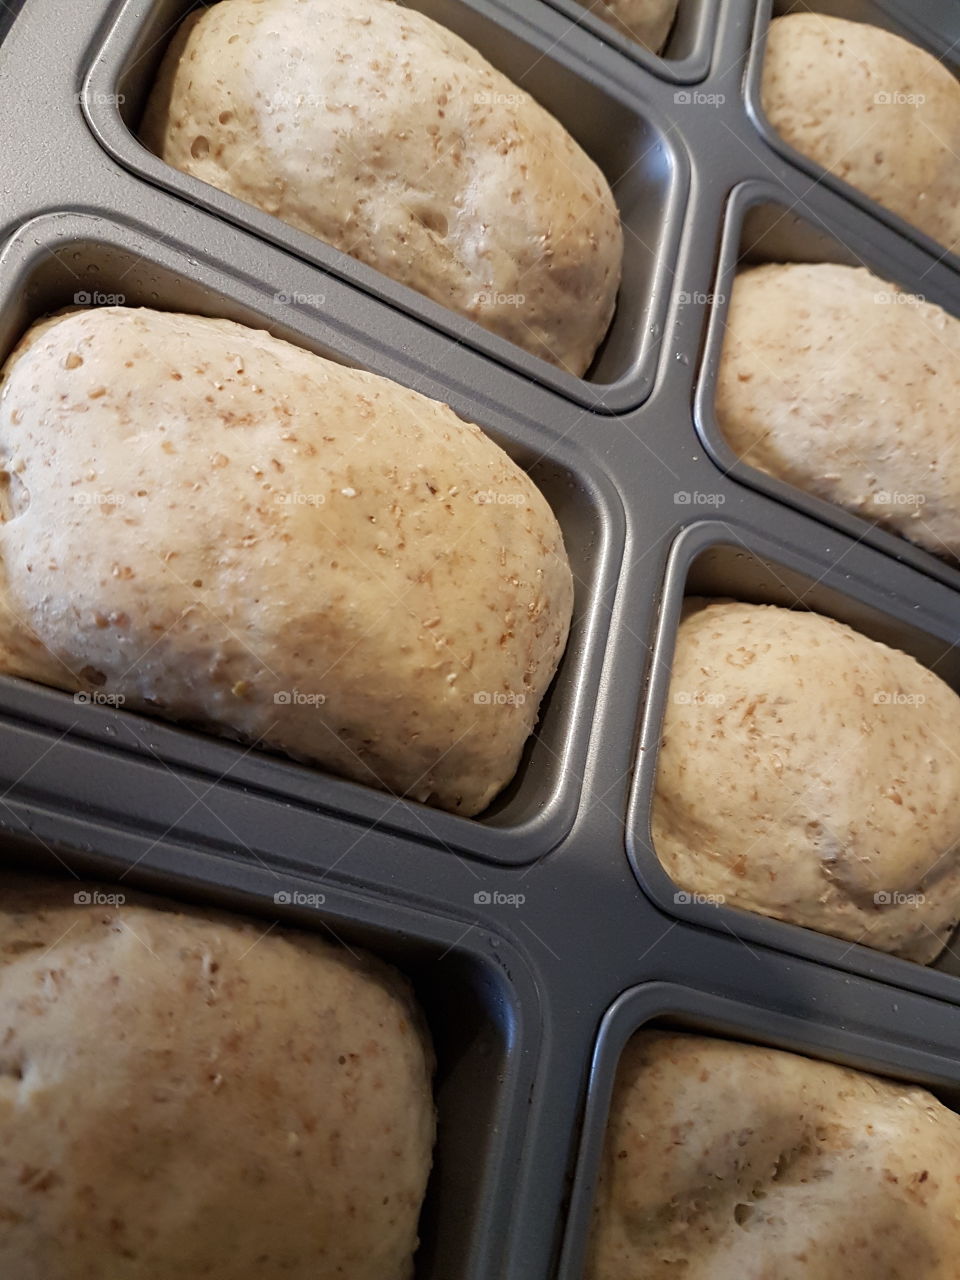 Homemade mini bread just out of the oven